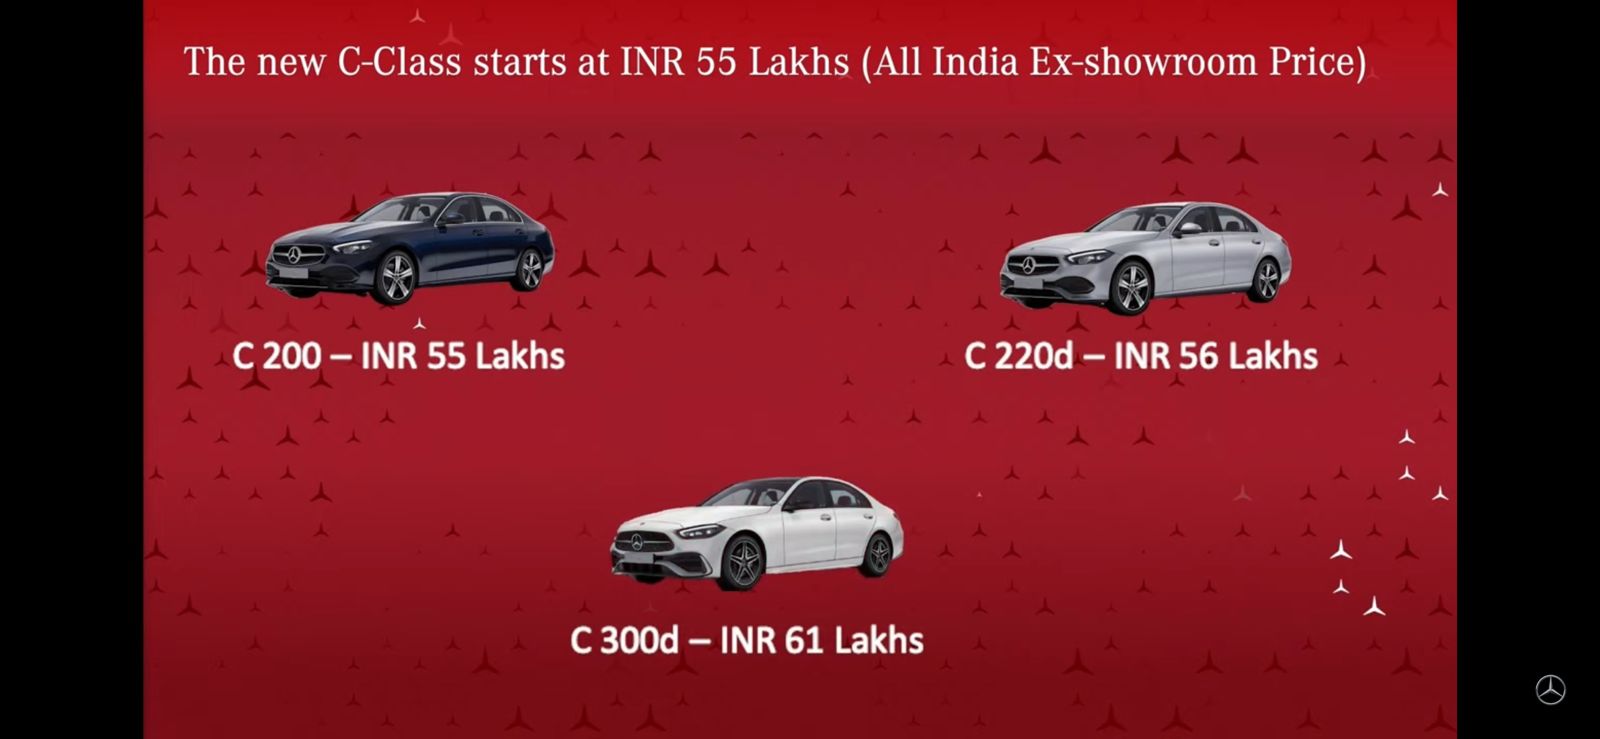 <p>The C200 starts from Rs 55 lakh while the C220d is priced at Rs 56 lakh and the top of the line C300d is priced at Rs 61 lakh</p>